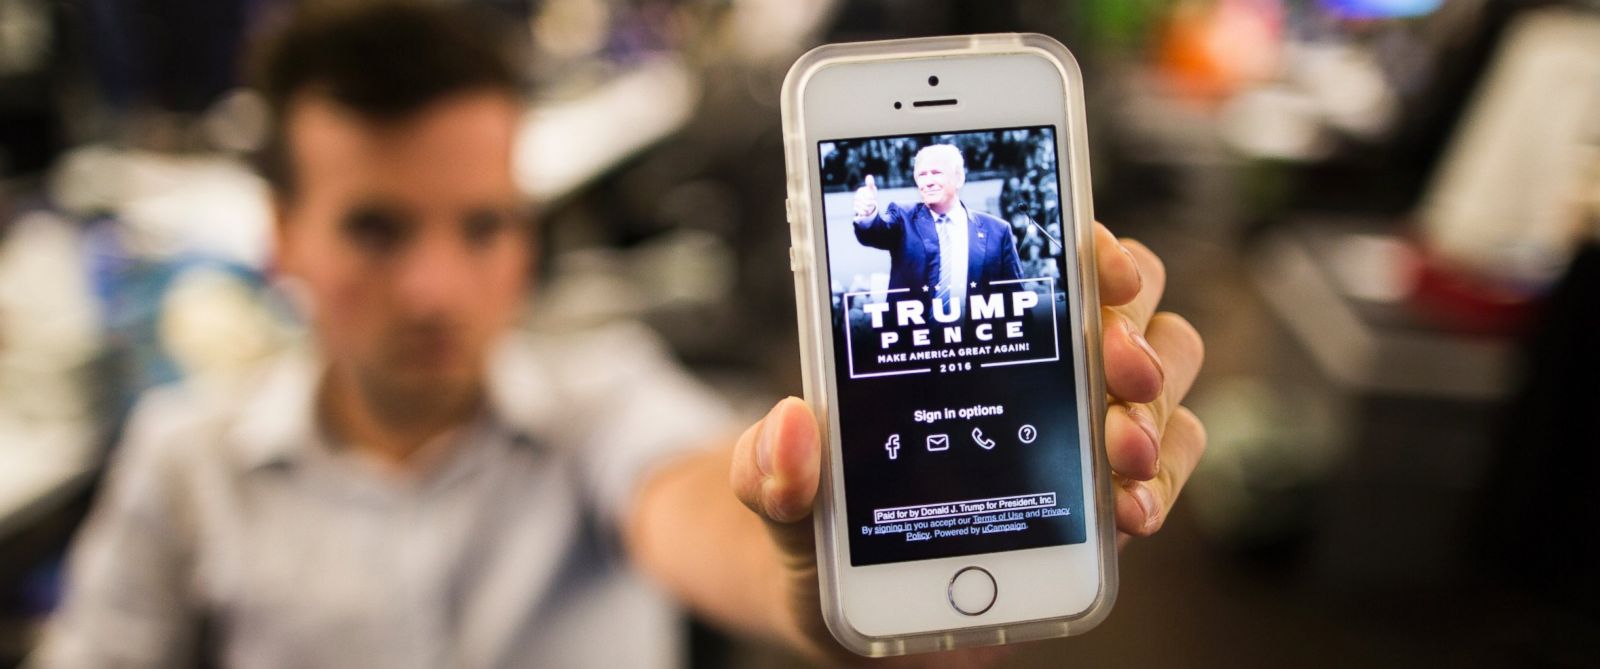 PHOTO: A smartphone with the Trump campaign app "America First," open is seen here, AUg. 25, 2016.